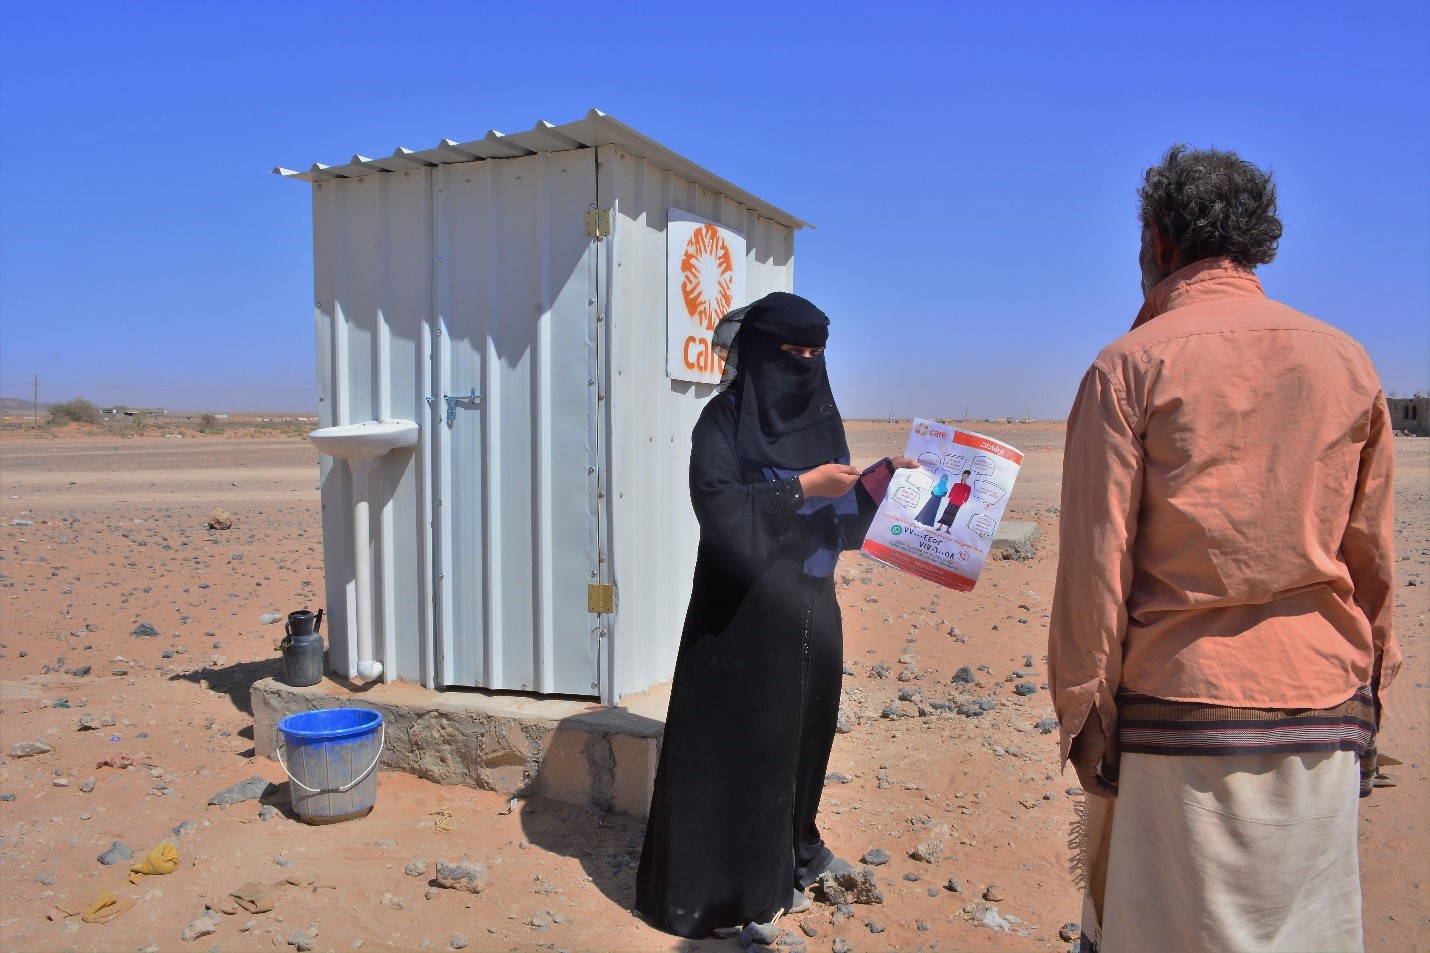 A woman in a burka holding a paper in front of a portable toilet.